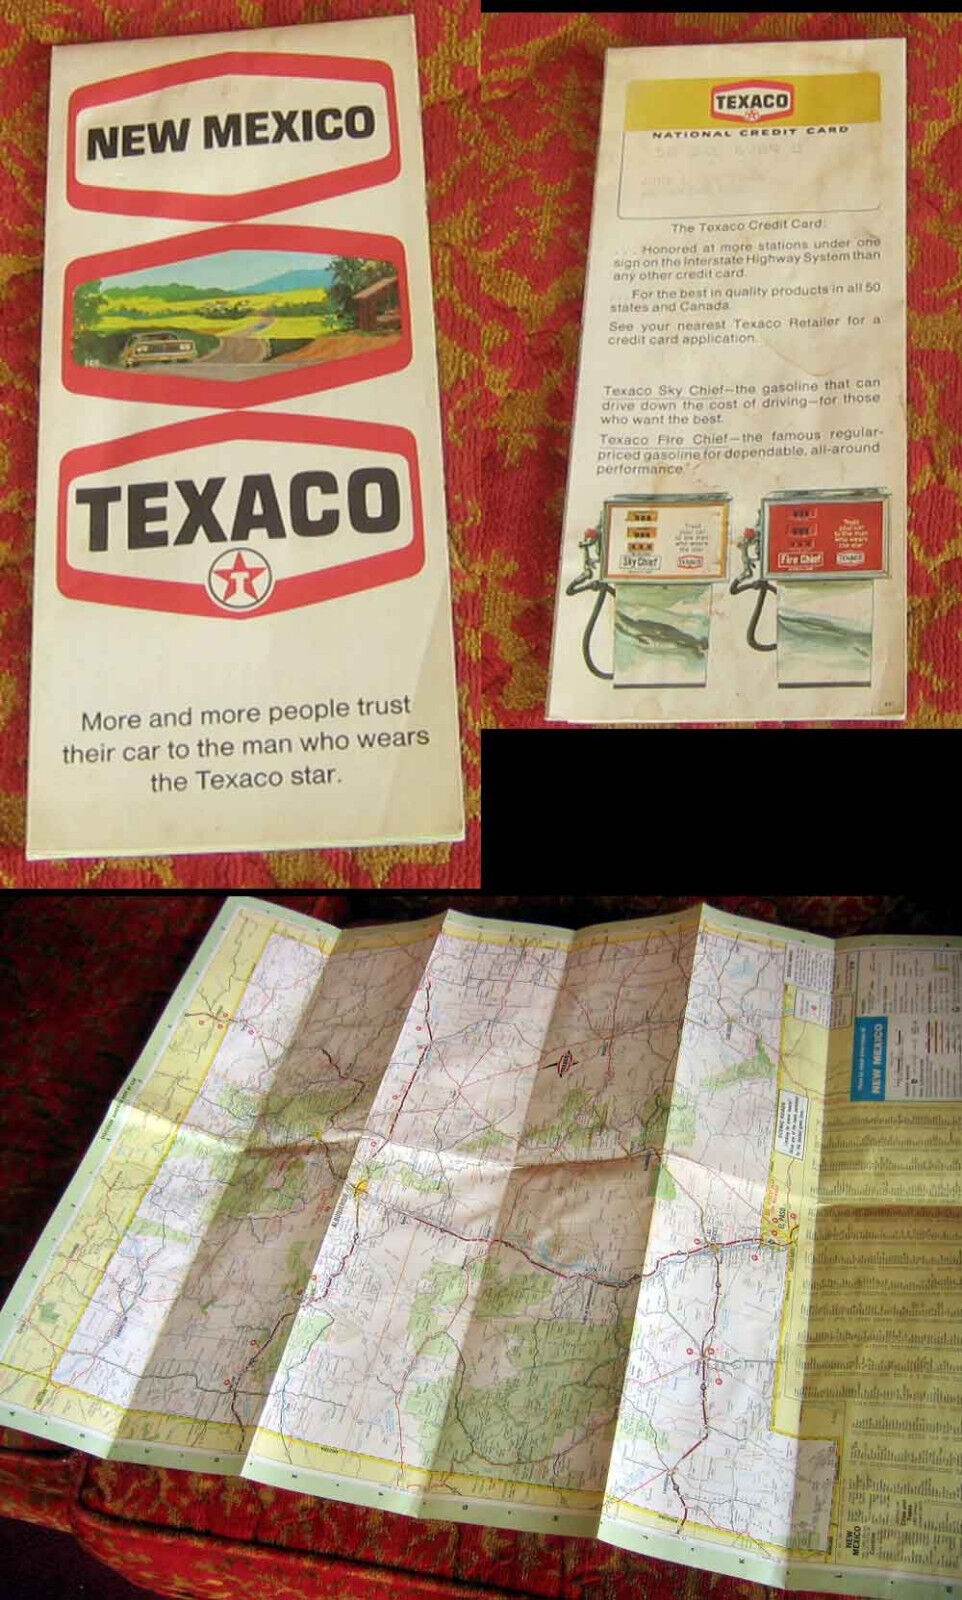 True Vtg 1969 New Mexico Texaco Oil Advertisting Complimentary Road Map